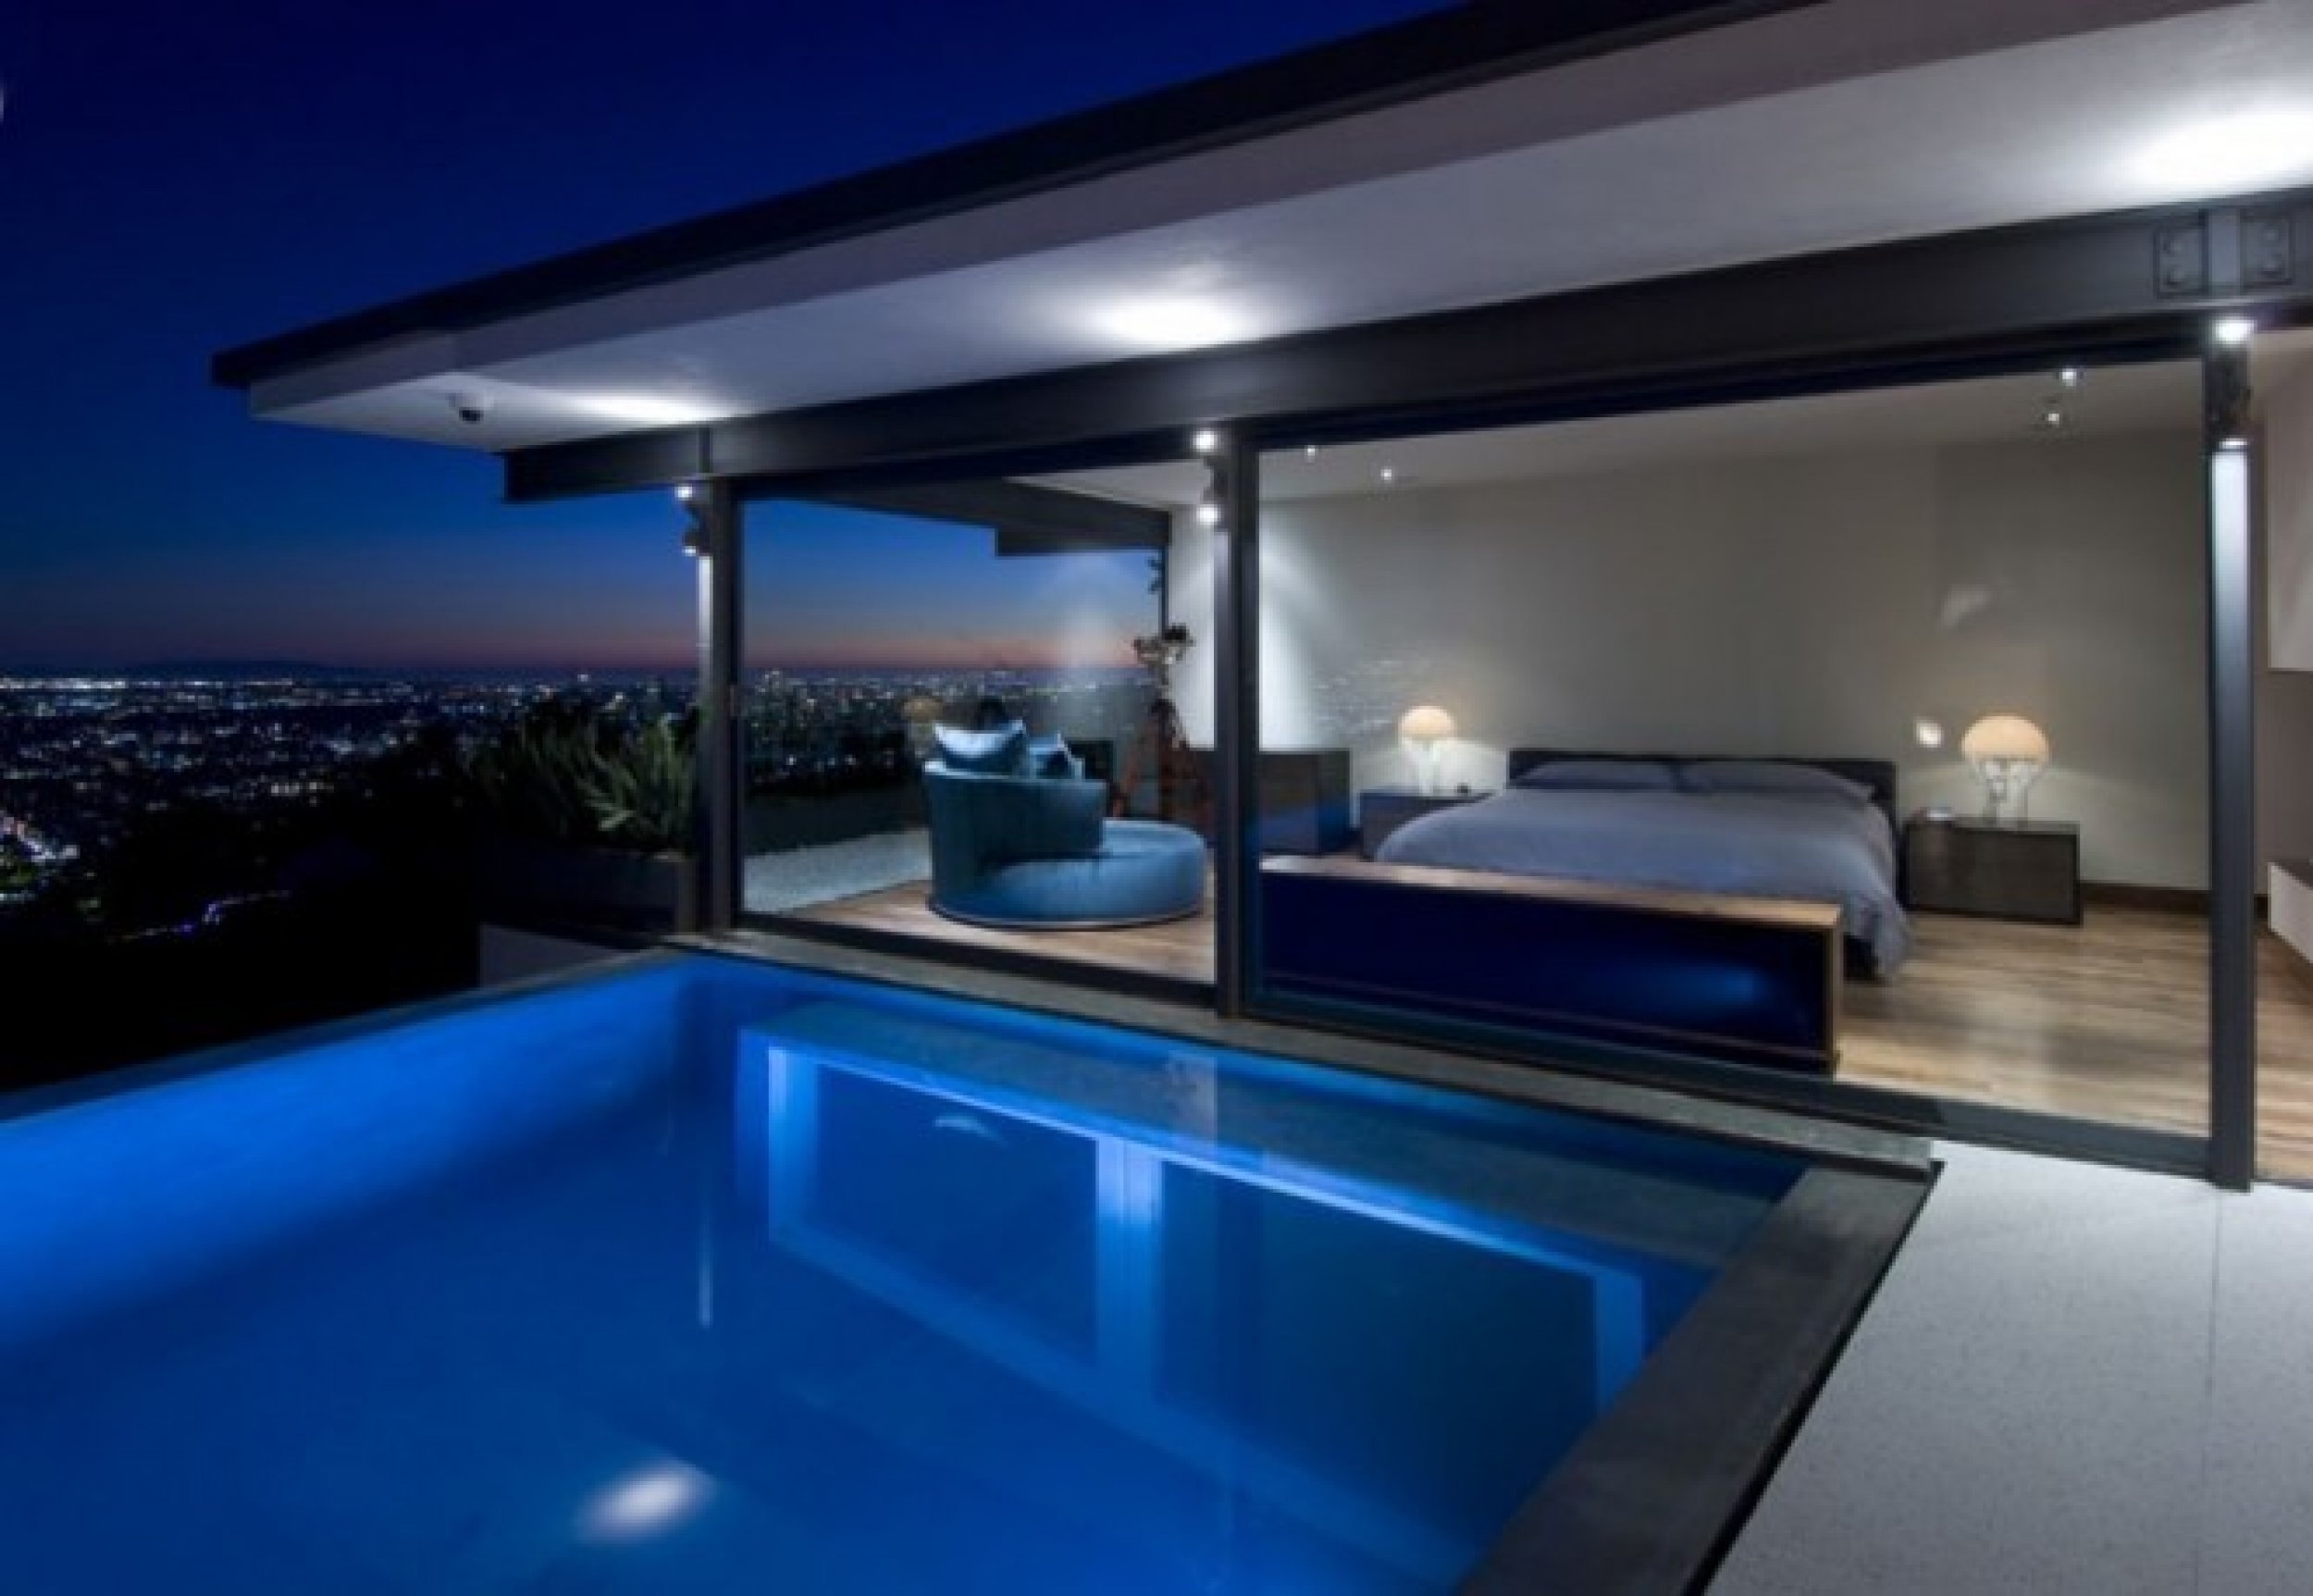 Hollywood Hills home